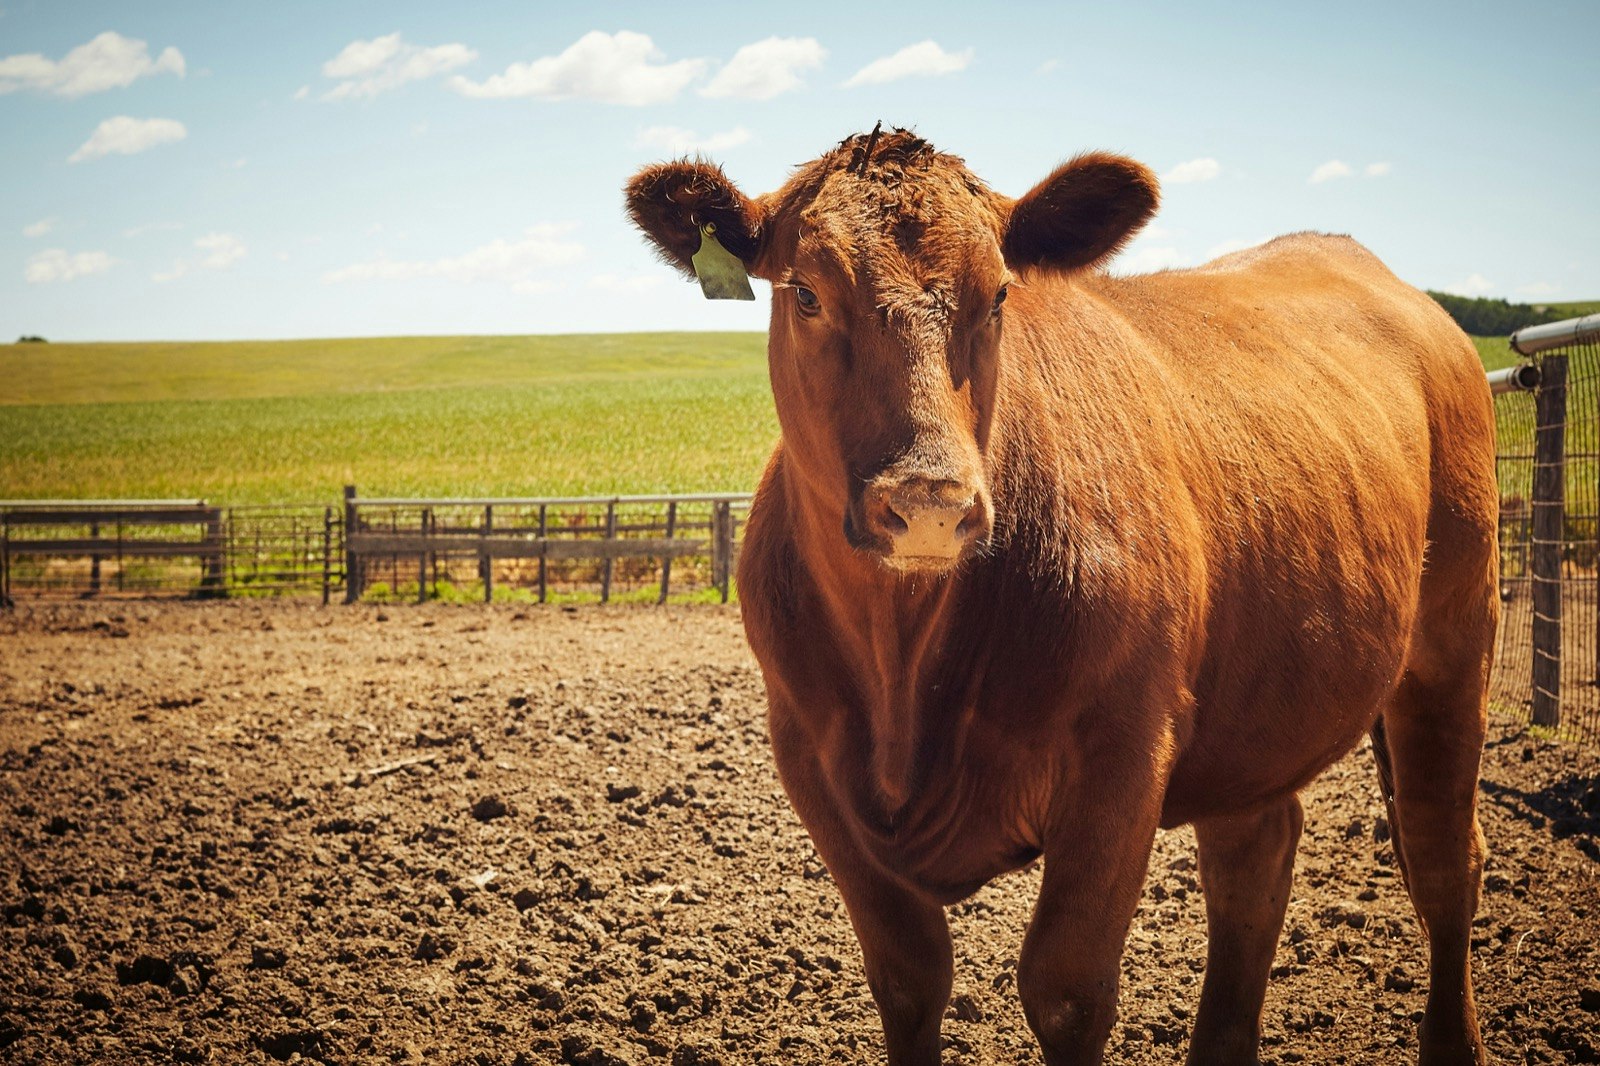 A brown cow in a pen gazes at the camera with grassy fields behind her in Nebraska